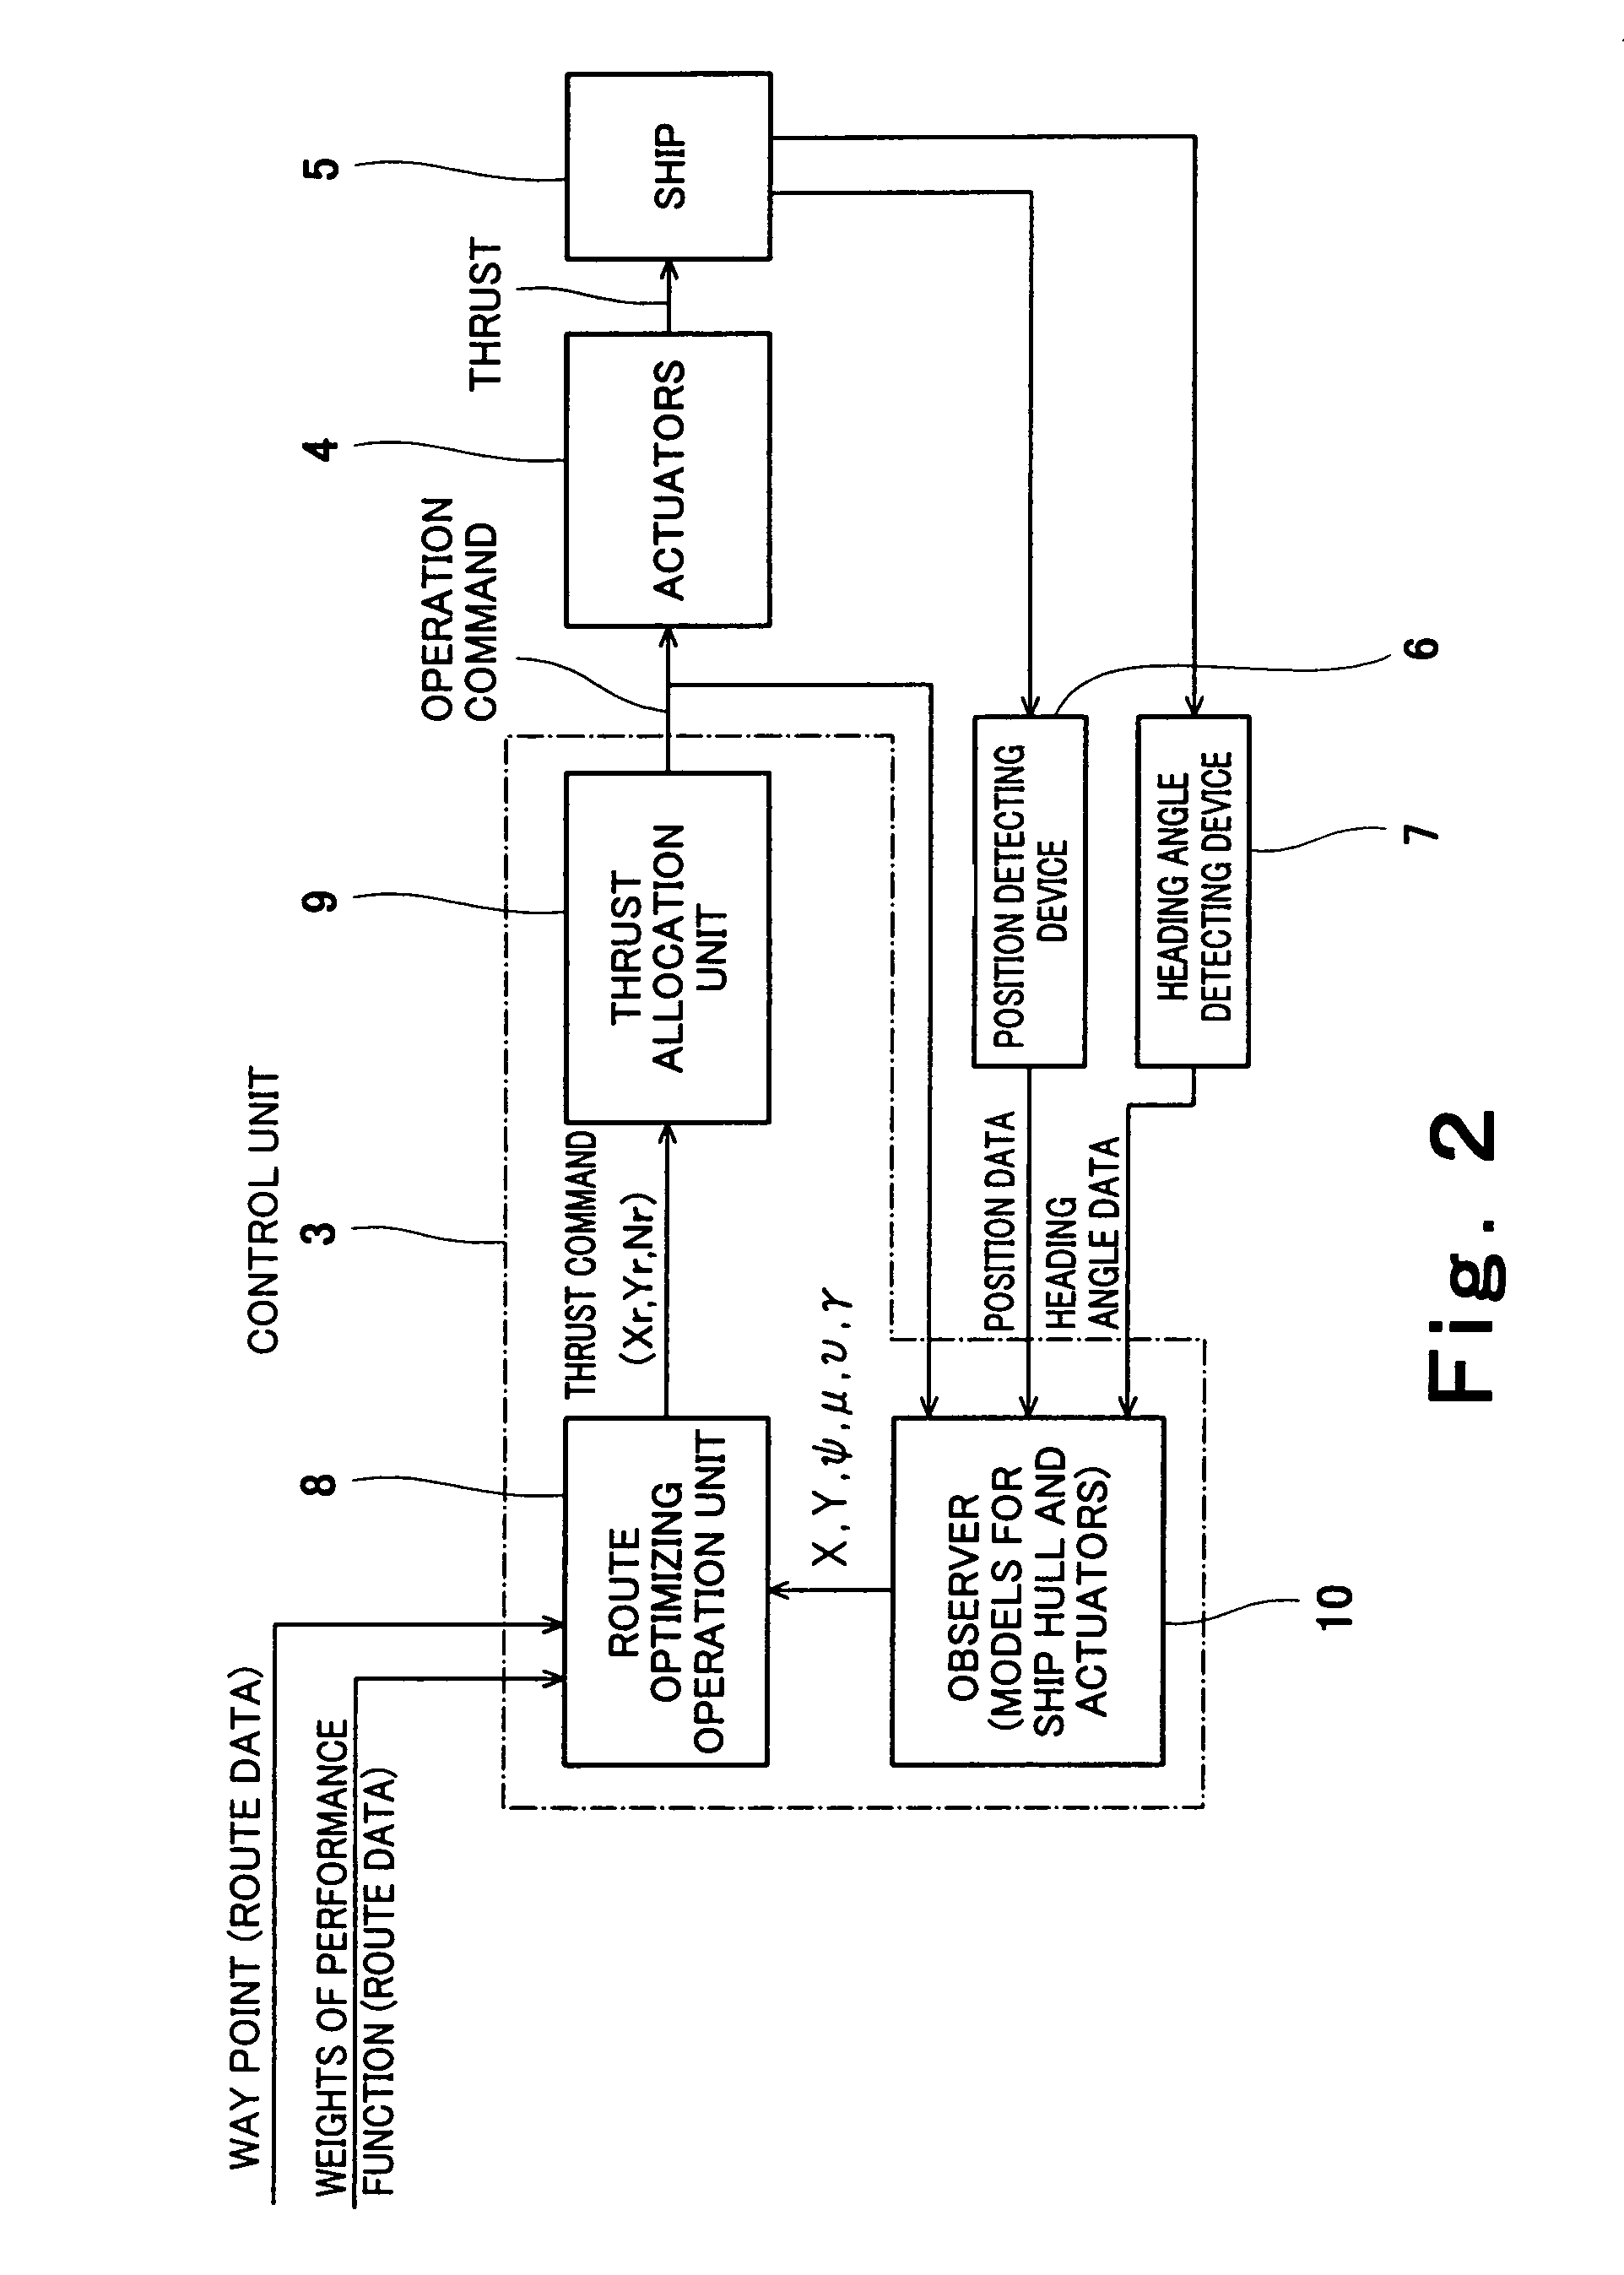 Method and system for maneuvering movable object